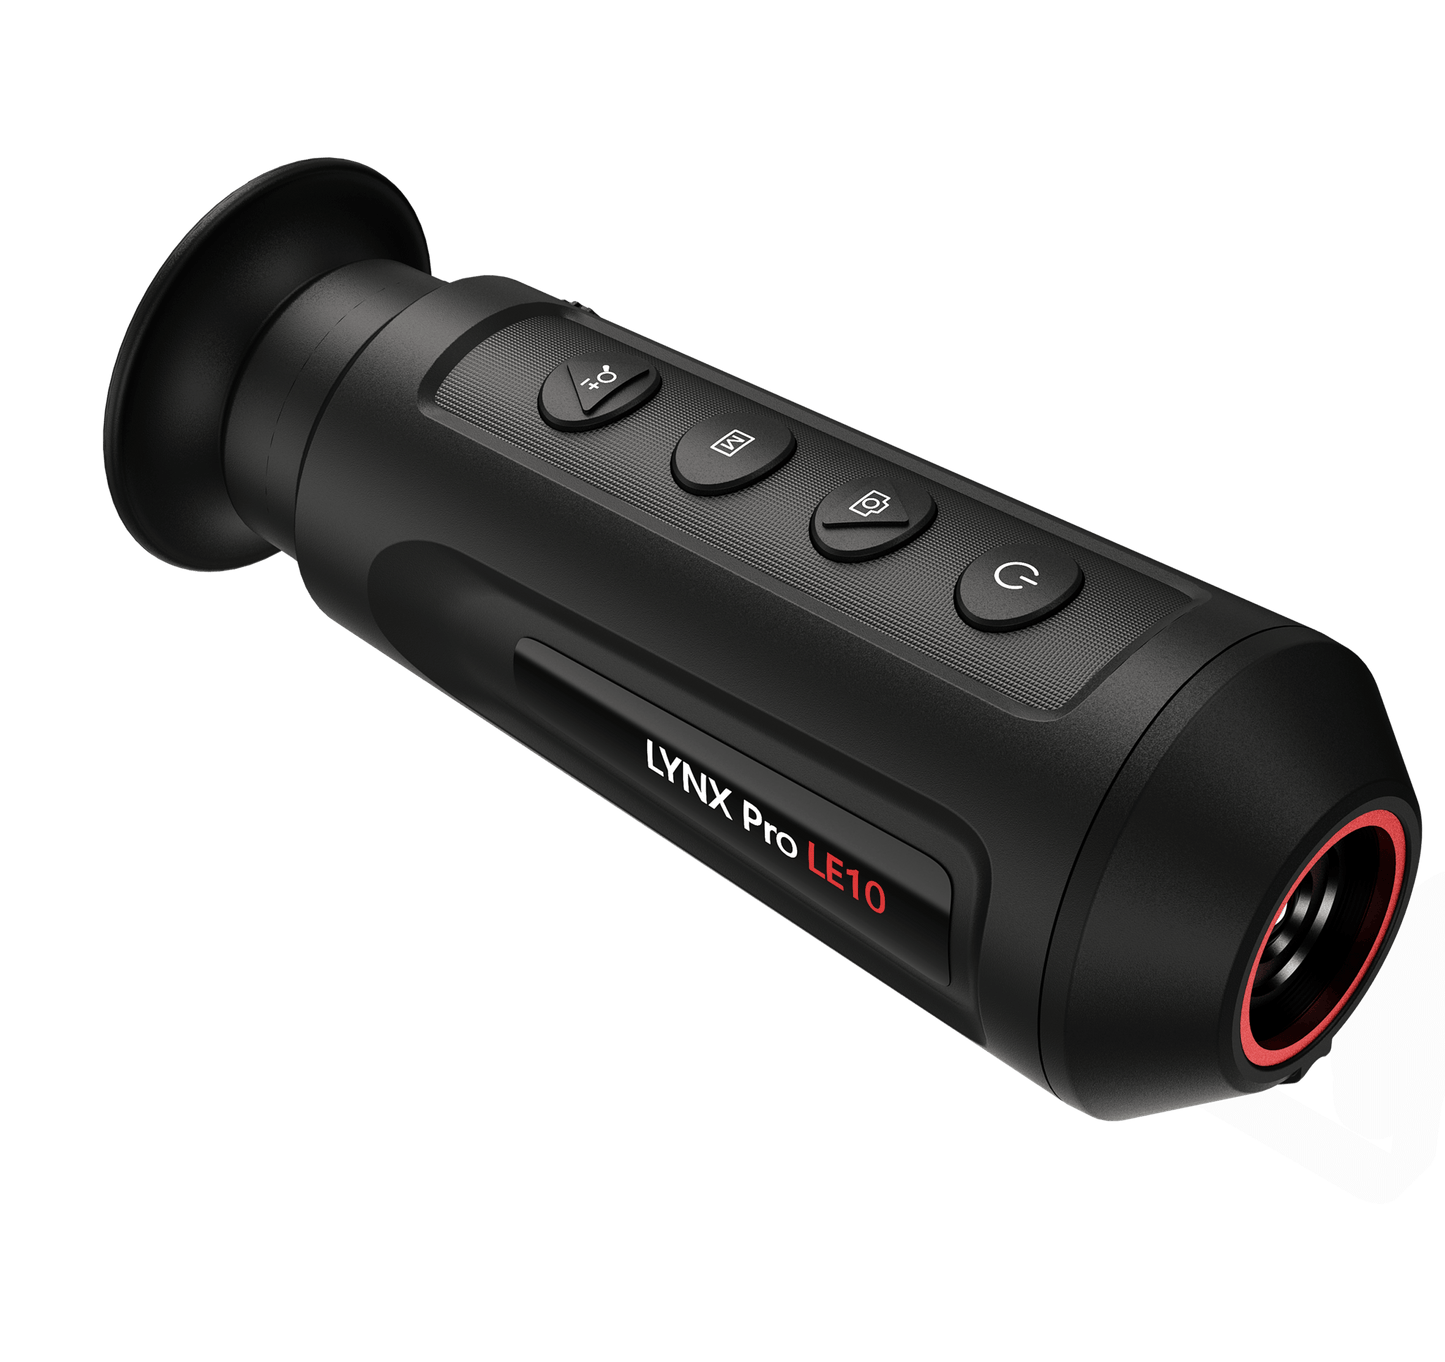 Cape Thermal - The best thermal imaging monoculars for sale - HikMicro LYNX Pro LE10 Handheld thermal imaging monocular - Right Hand Side View